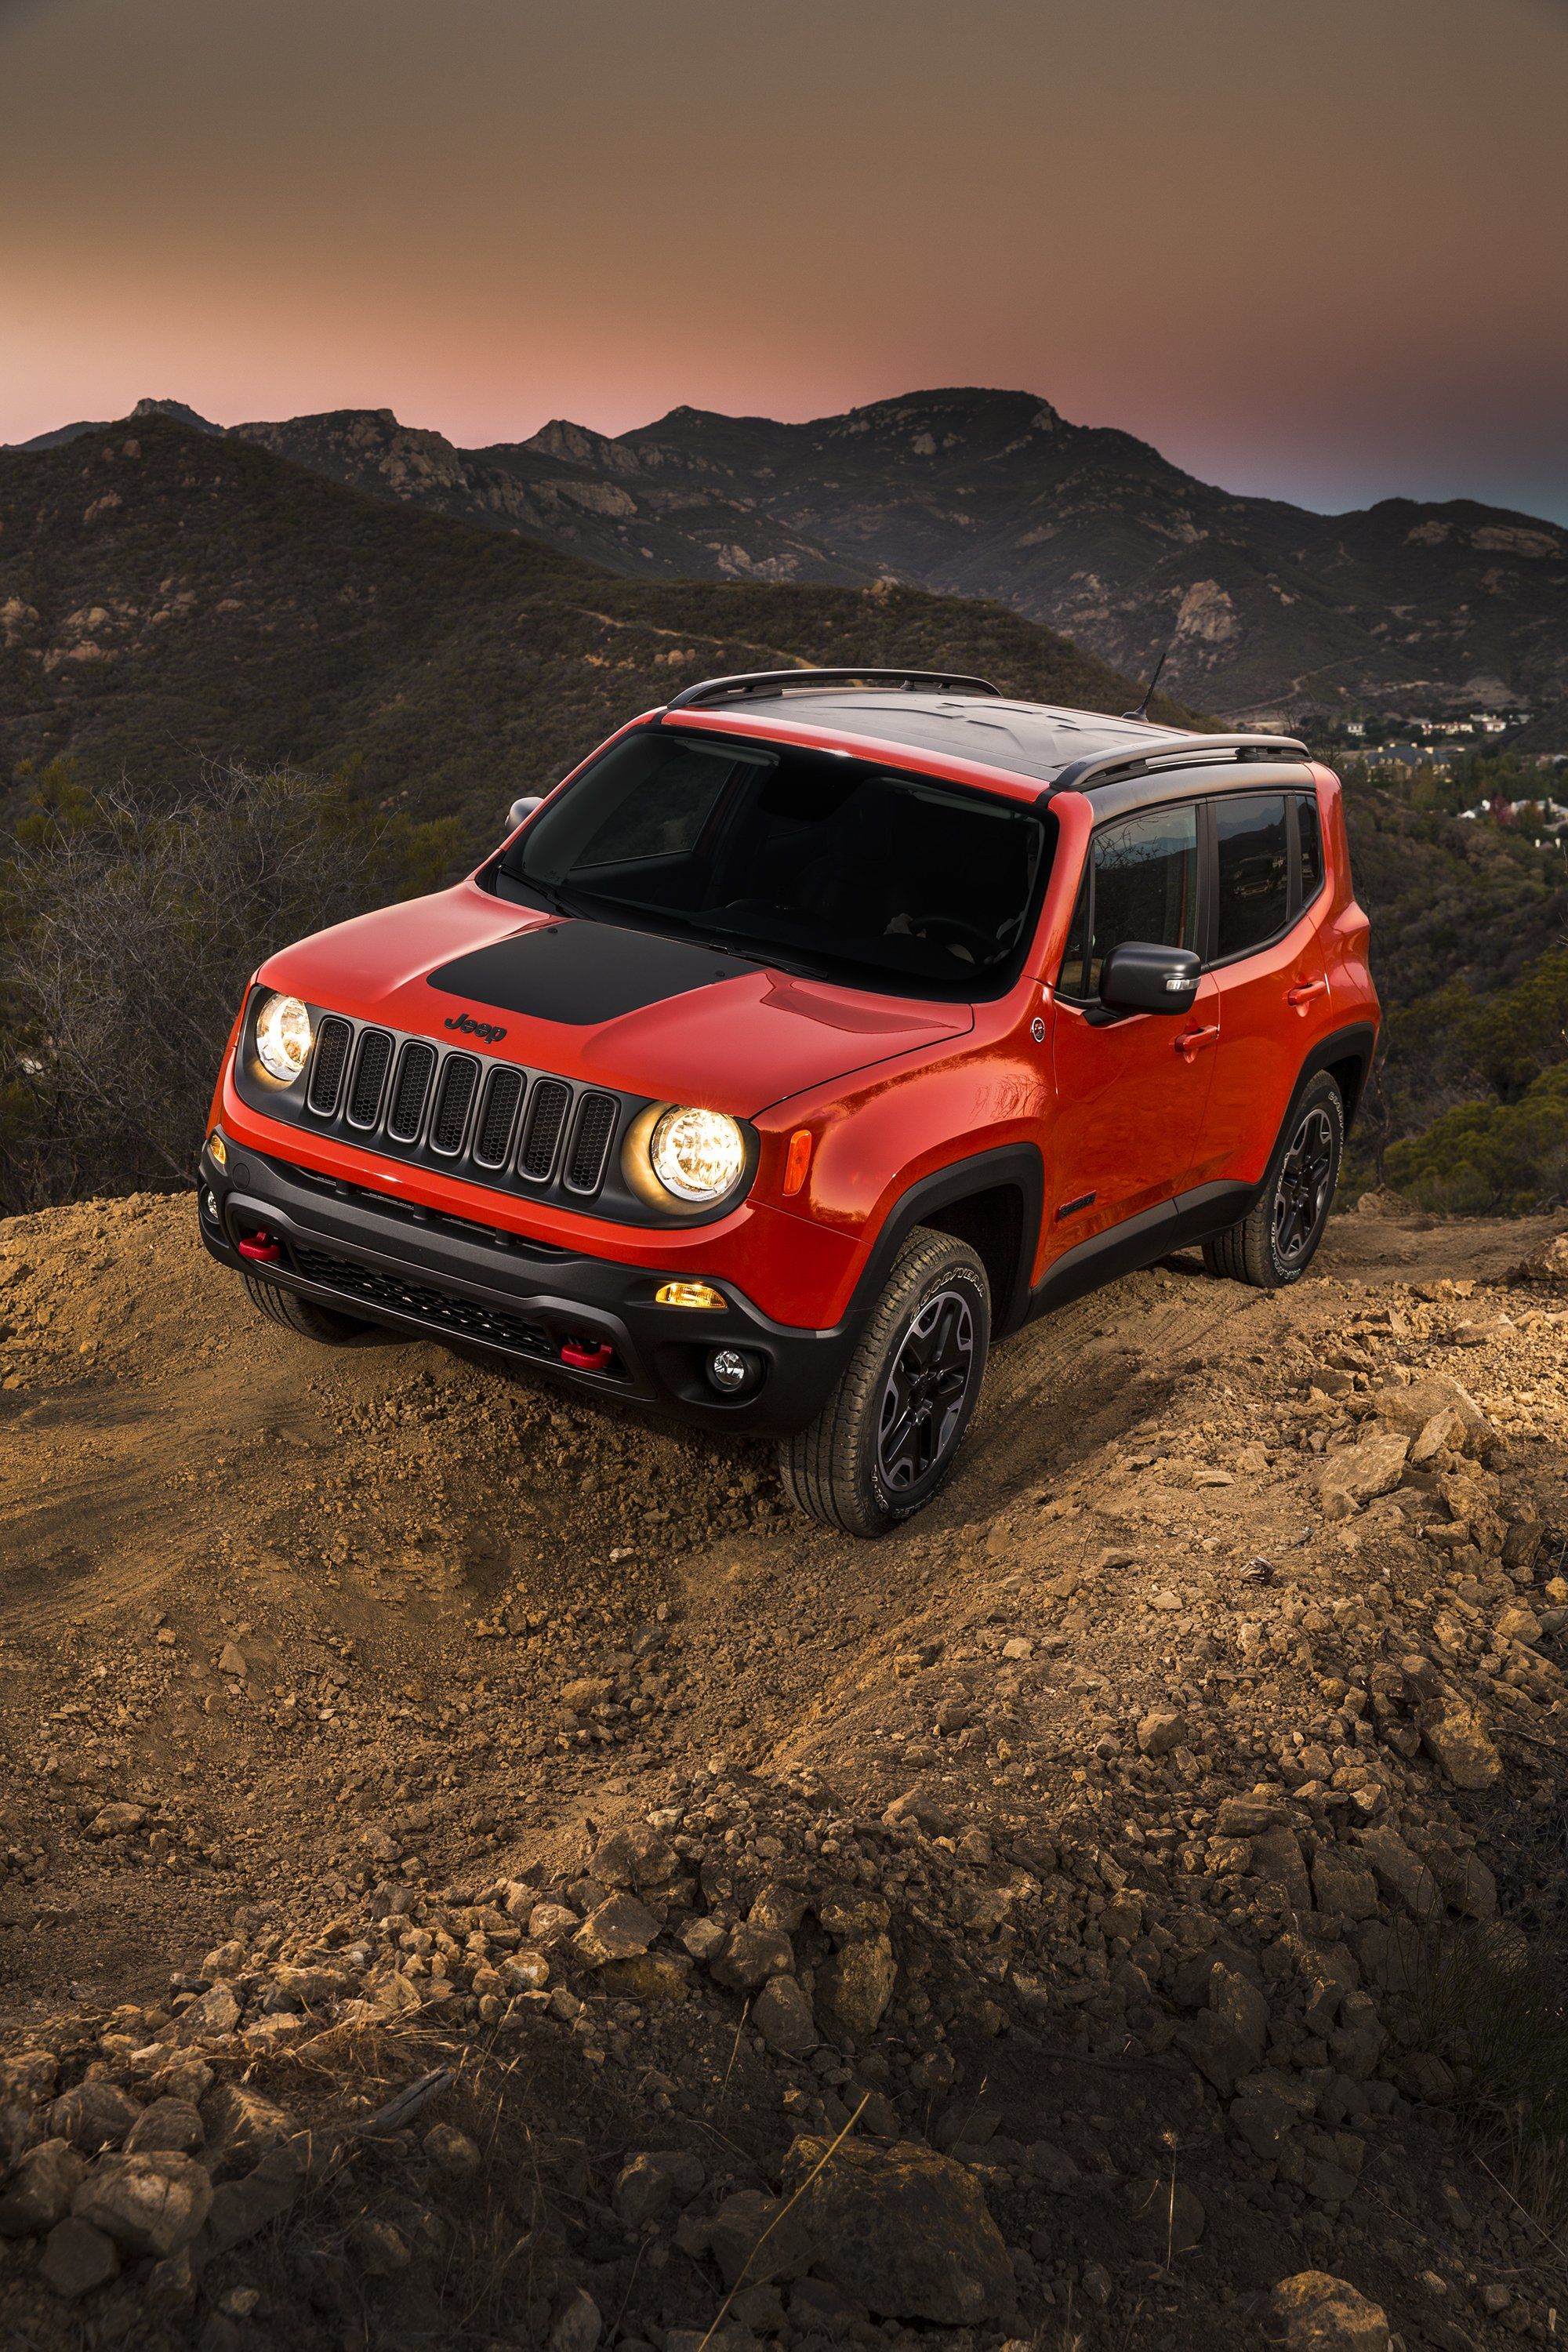 Jeep Renegade Wallpapers